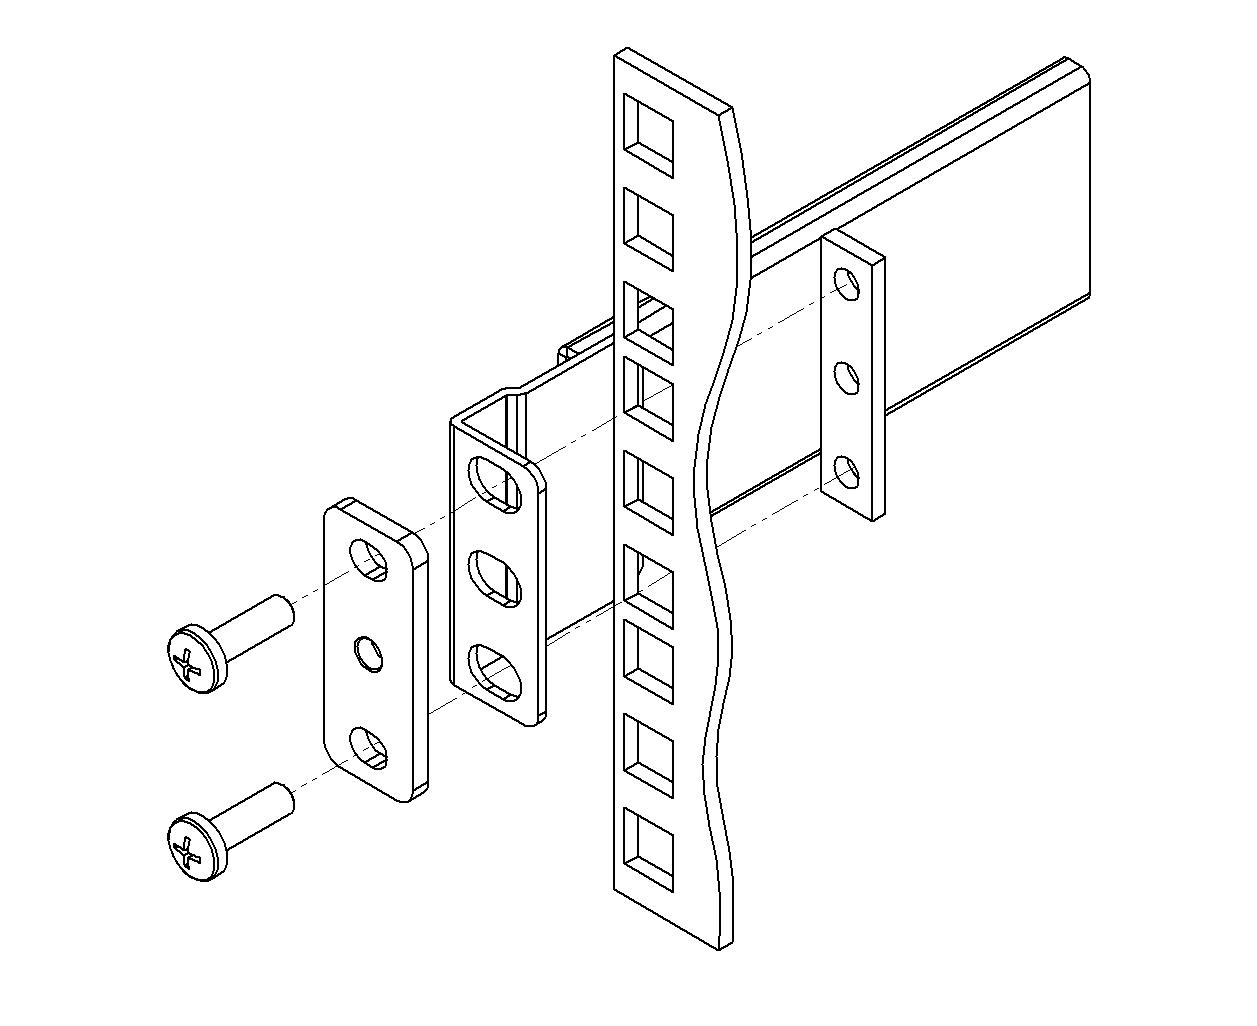 This diagram shows the proper way to screw in and secure the stationary slide rail.